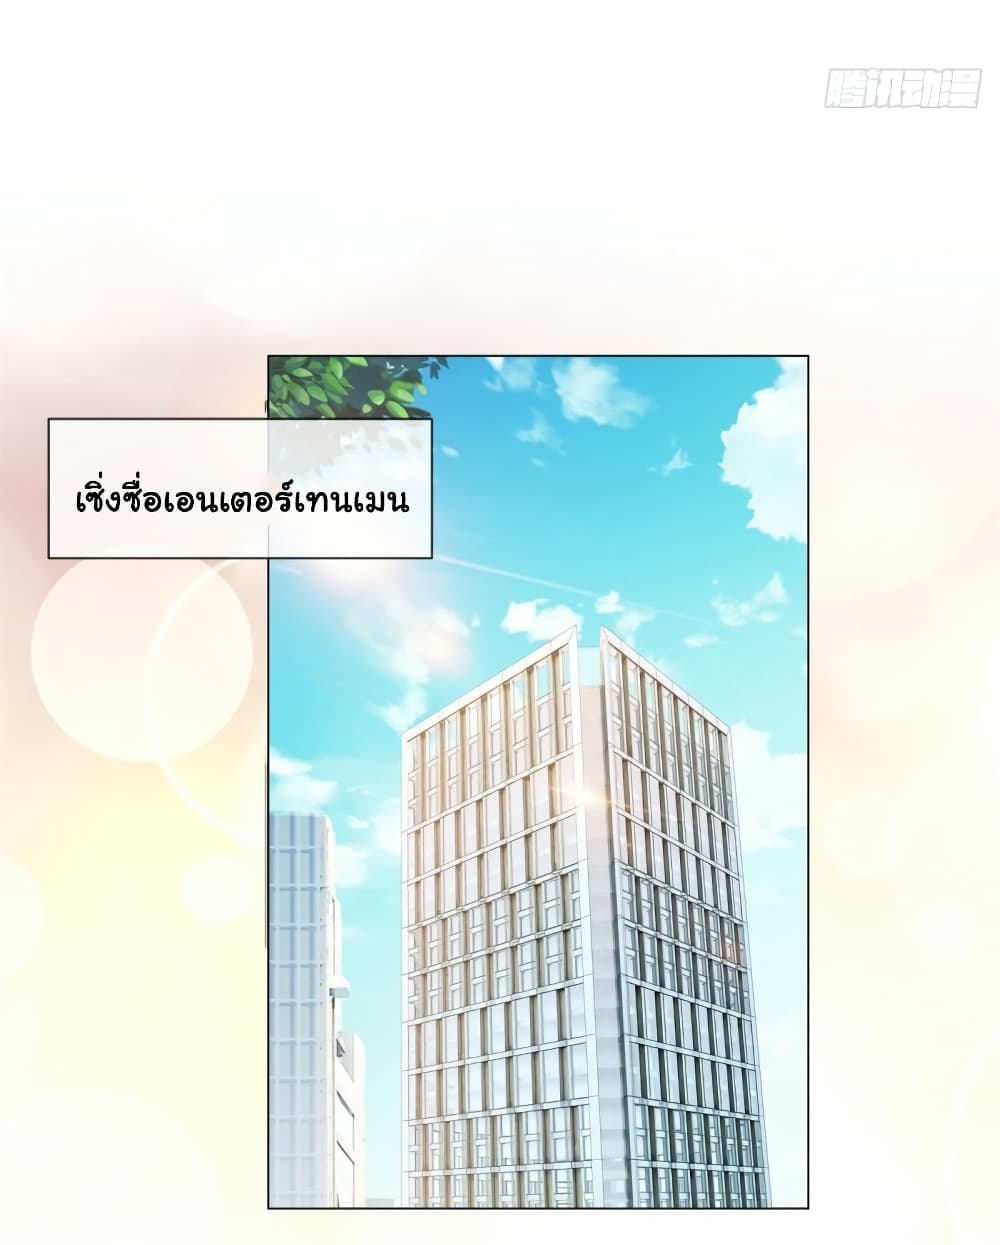 The Lovely Wife And Strange Marriage à¹à¸œà¸™à¸£à¸±à¸à¸¥à¸§à¸‡à¹ƒà¸ˆ 322 (9)